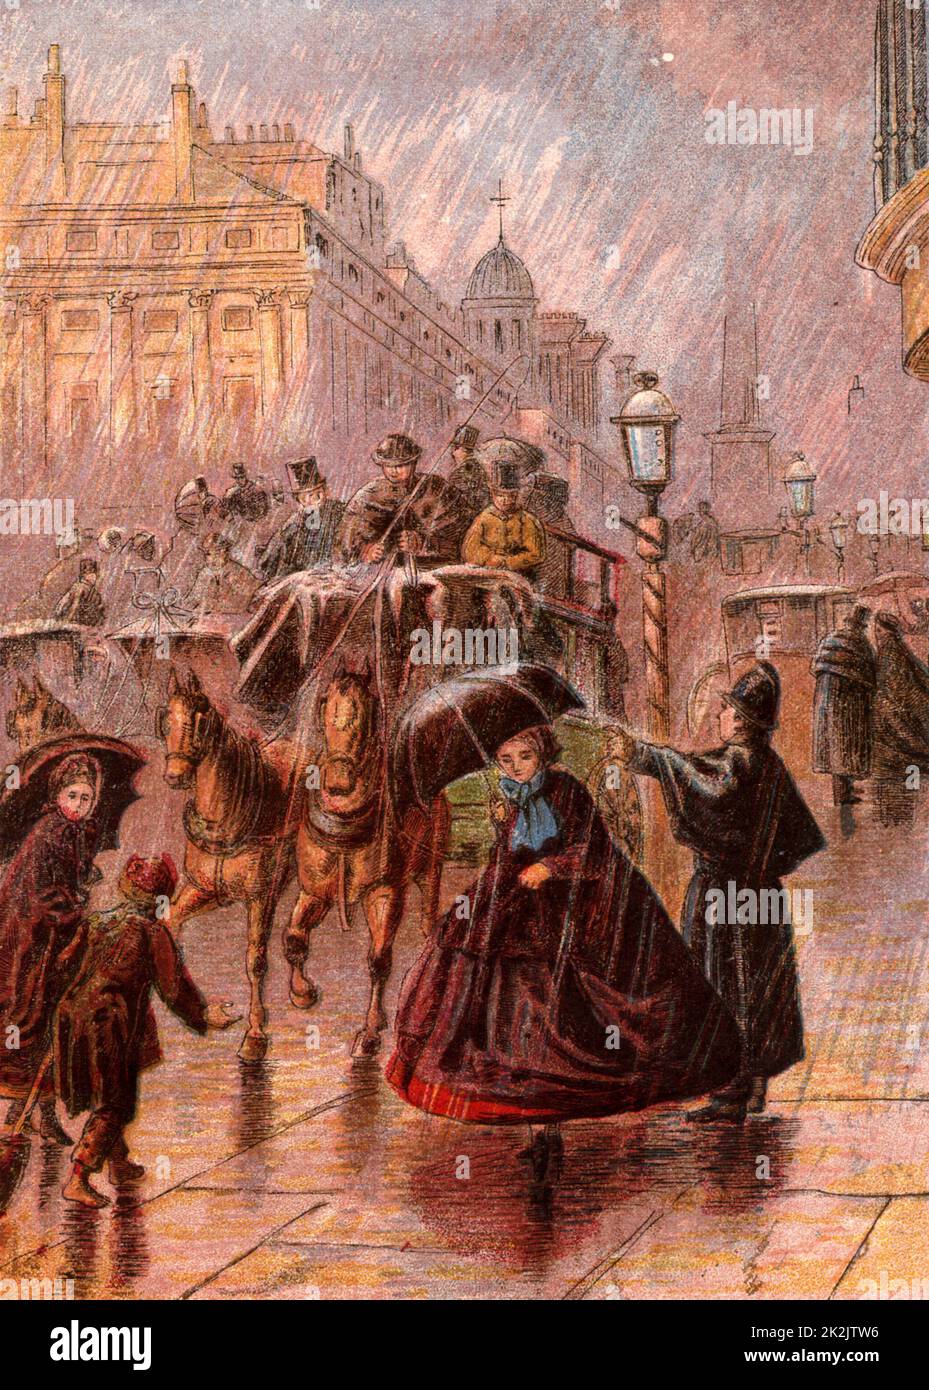 Busy street scene in London, England, on a rainy day. A policeman in a Macintosh cape points out the way, ladies hold their open umbrellas in an effort to keep themselves dry. Horse-drawn buses and hansom cabs pass along the wet road. Kronheim chromolithograph from 'Pictures from Nature' by Mary Howitt (London, 1869). Stock Photo